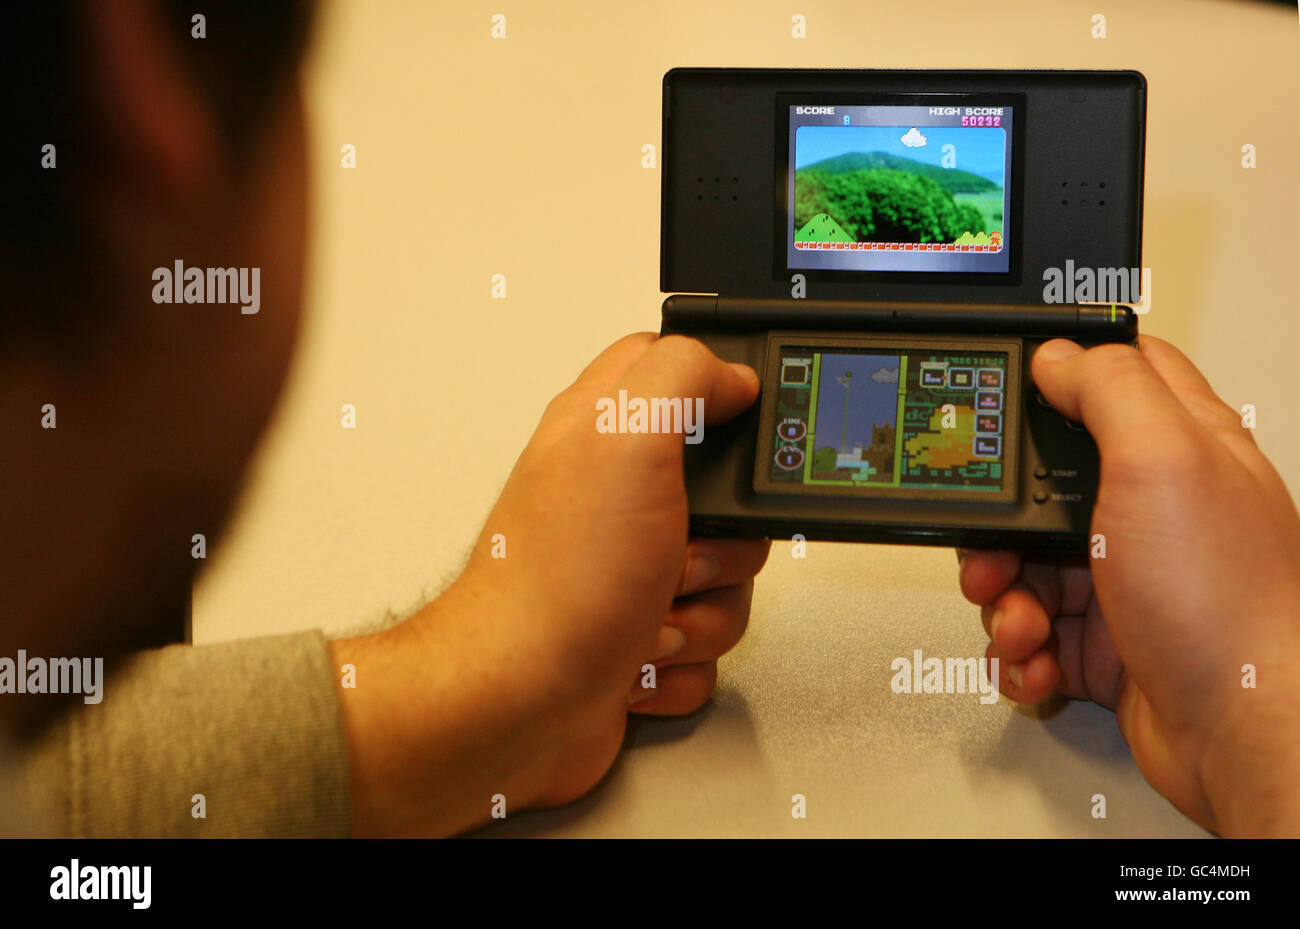 Nintendo Ds Game High Resolution Stock Photography and Images - Alamy